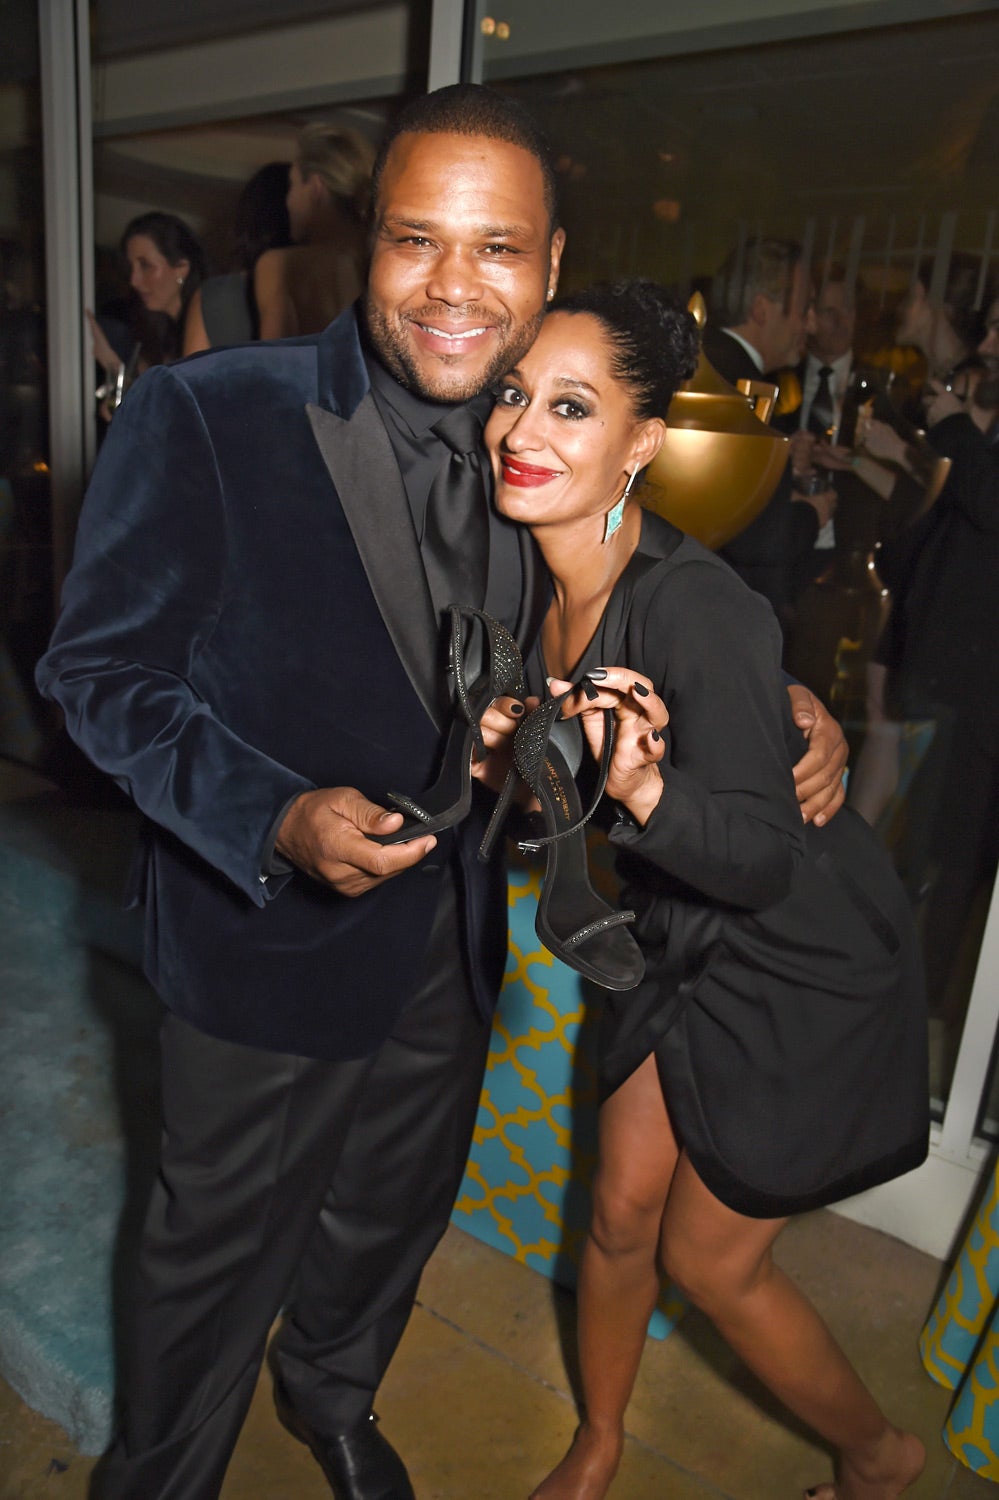 Tracee Ellis Ross and Anthony Anderson Will Host the BET Awards
